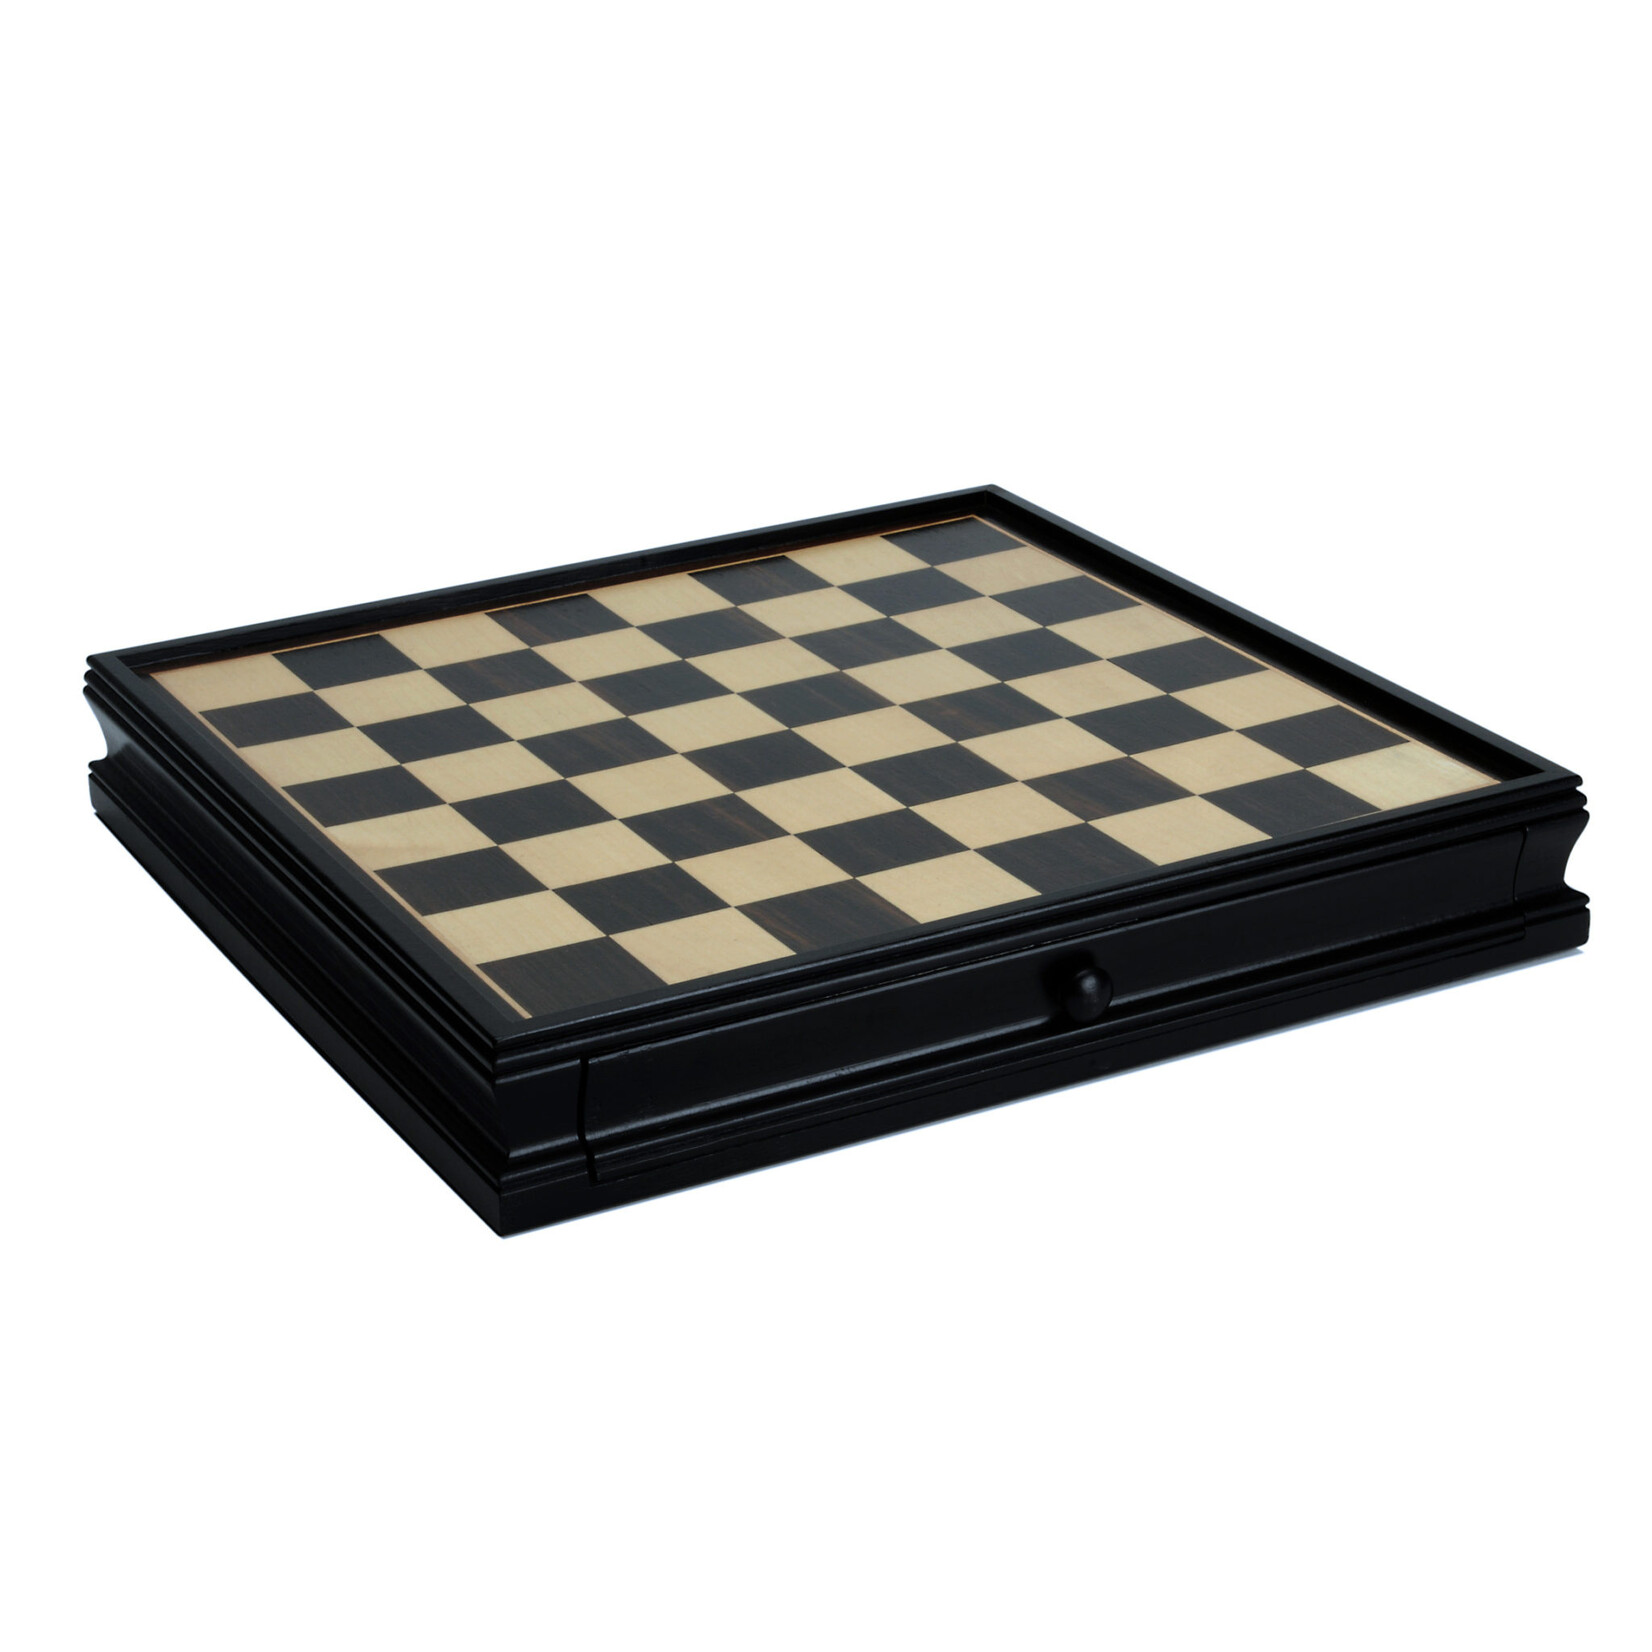 Wood Expressions CHESS BOARD: Black/Natural Wood Drawer (15")